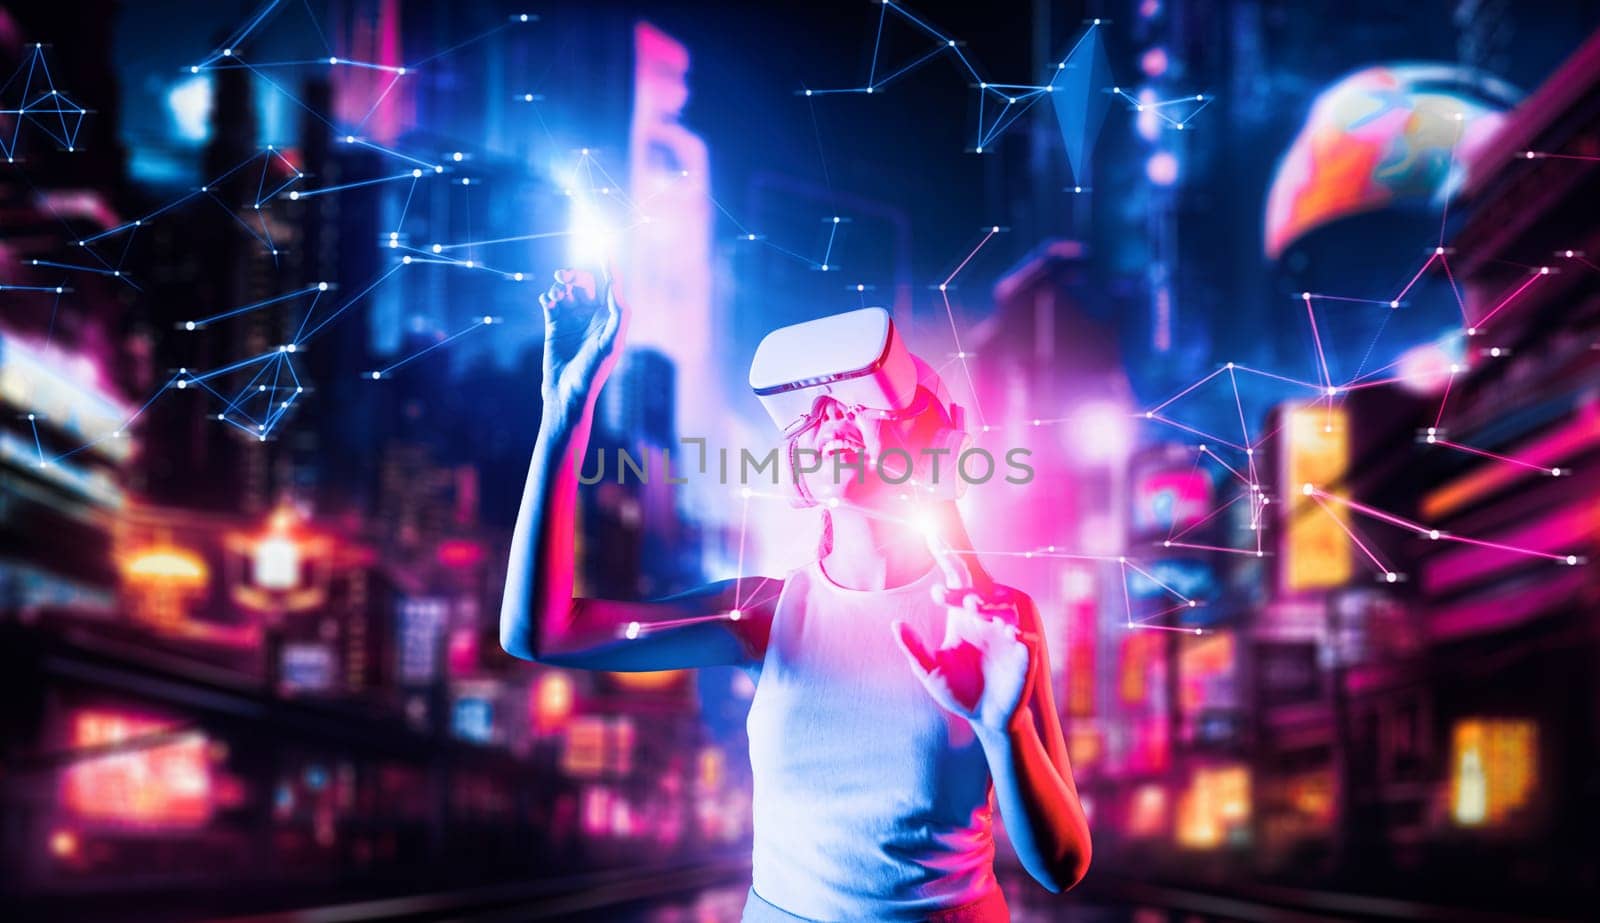 Female stand in cyberpunk style building in meta wear VR headset connect metaverse, future cyberspace community technology. Woman use fingers touch objects, light appear where she stab. Hallucination.